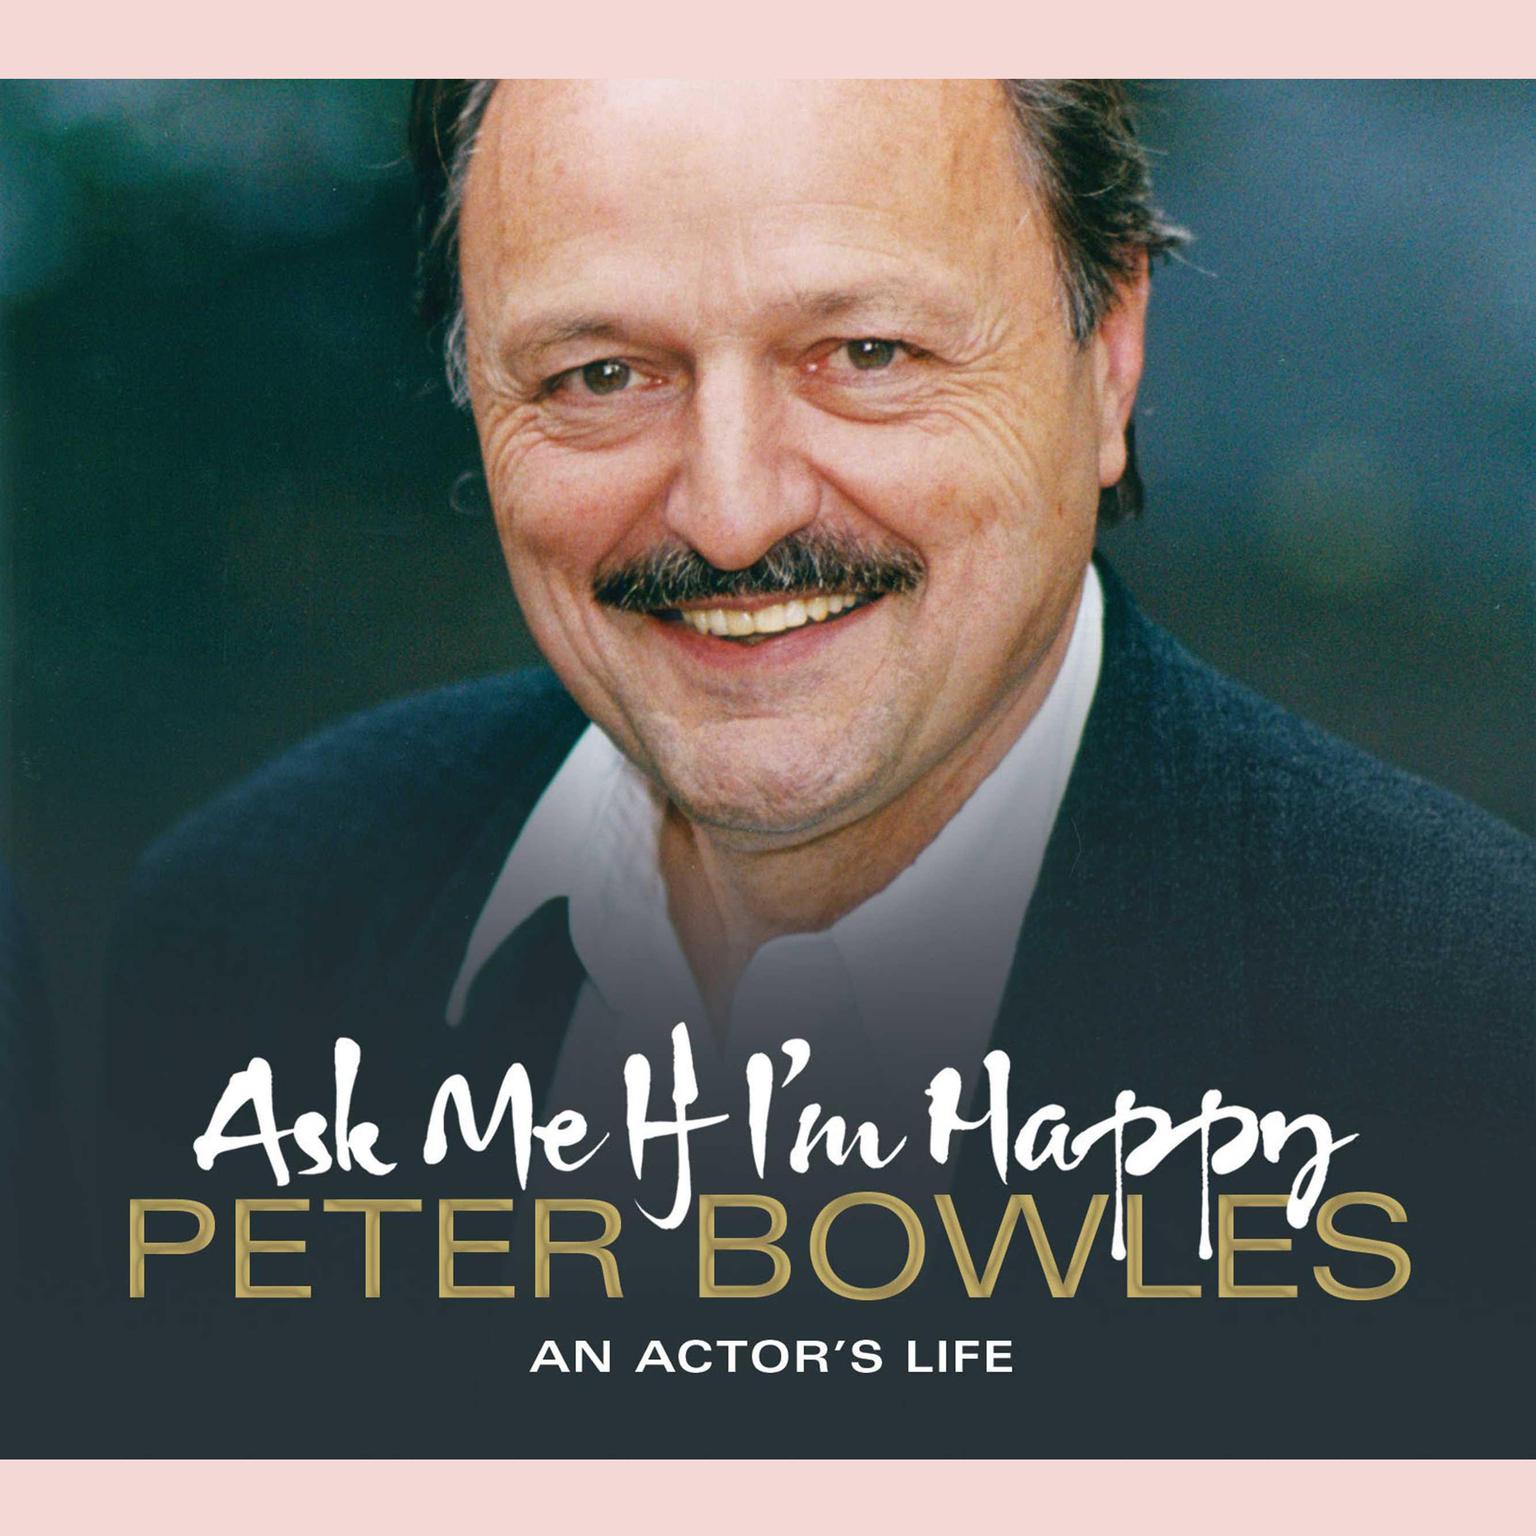 Ask Me if Im Happy: An Actors Life Audiobook, by Peter Bowles